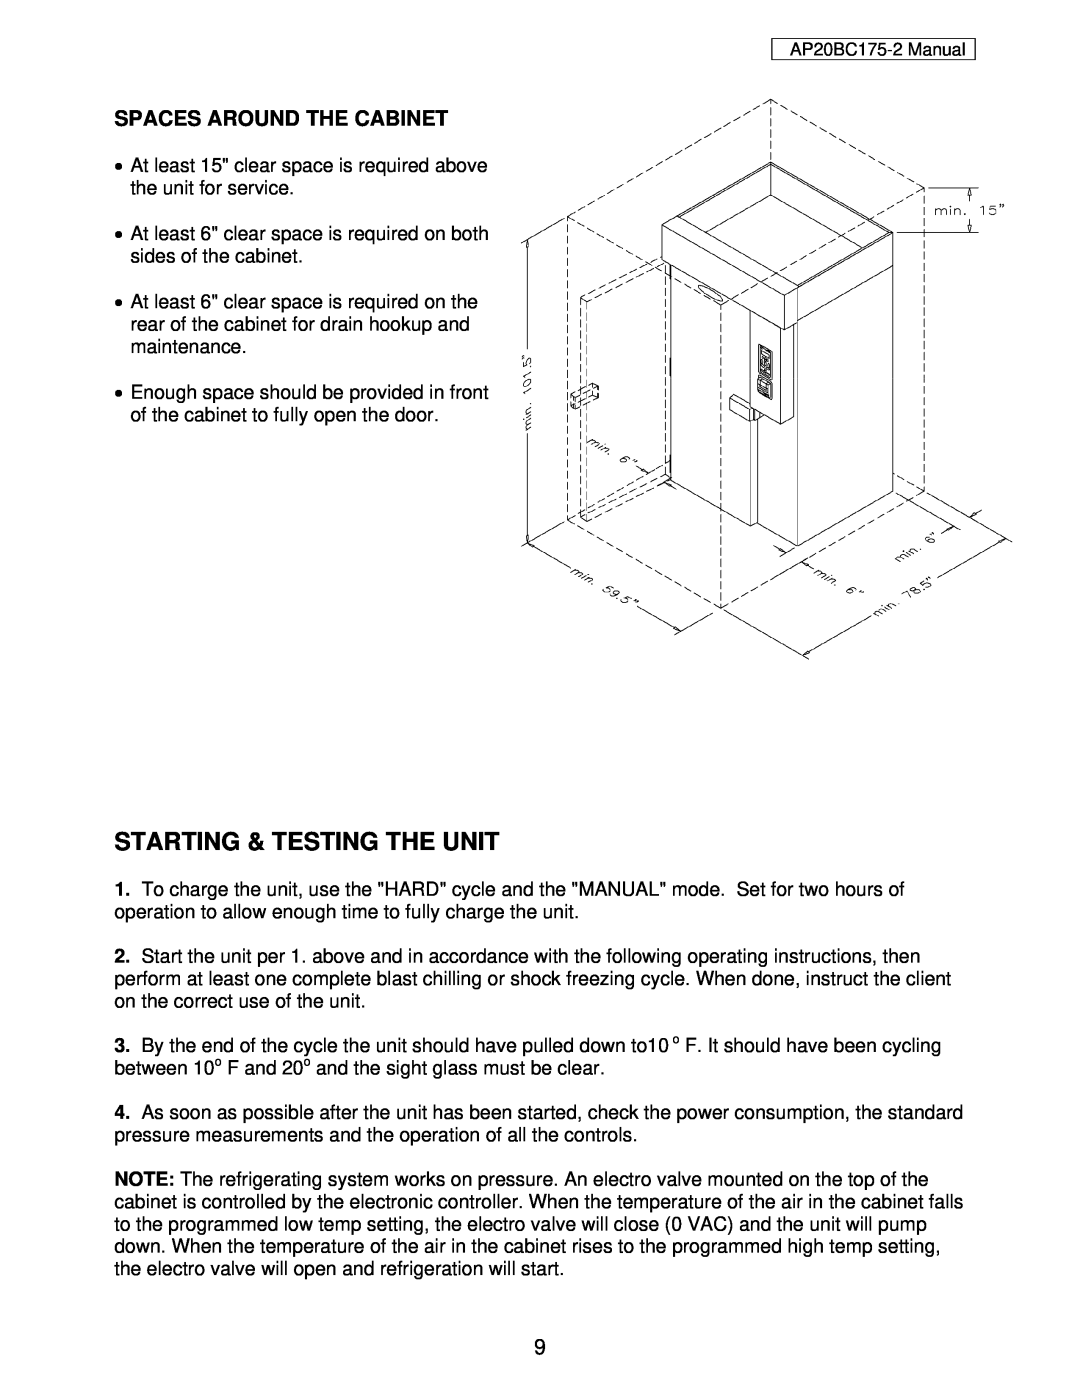 American Panel AP20BC175-2 user manual Starting & Testing The Unit, Spaces Around The Cabinet 